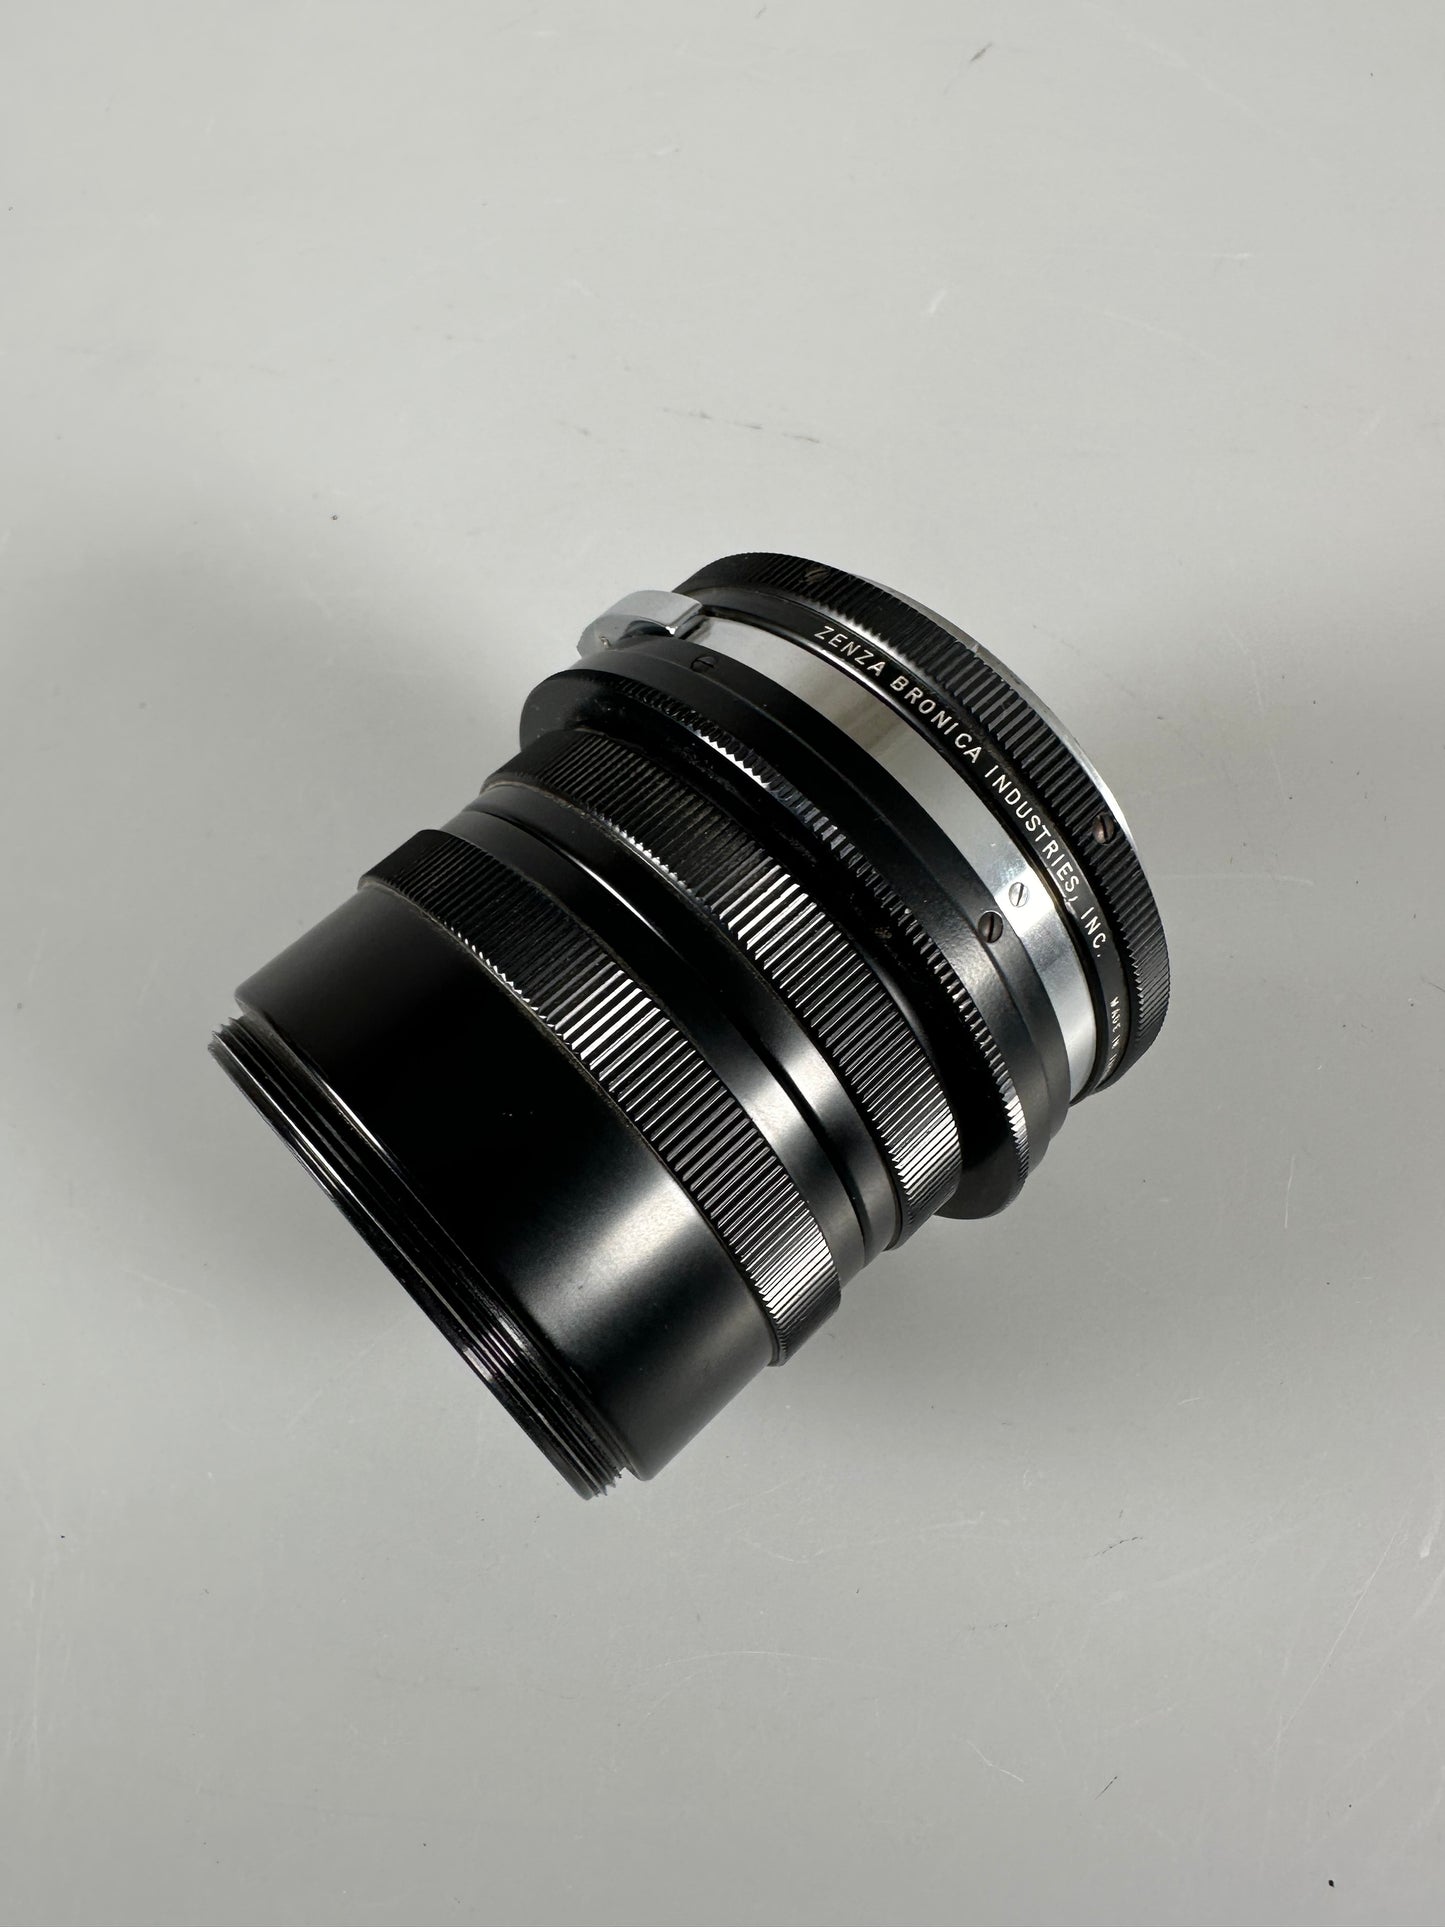 ZENZA Bronica Extension Tube Ring Set C-A C-B C-C C-D for S2 S